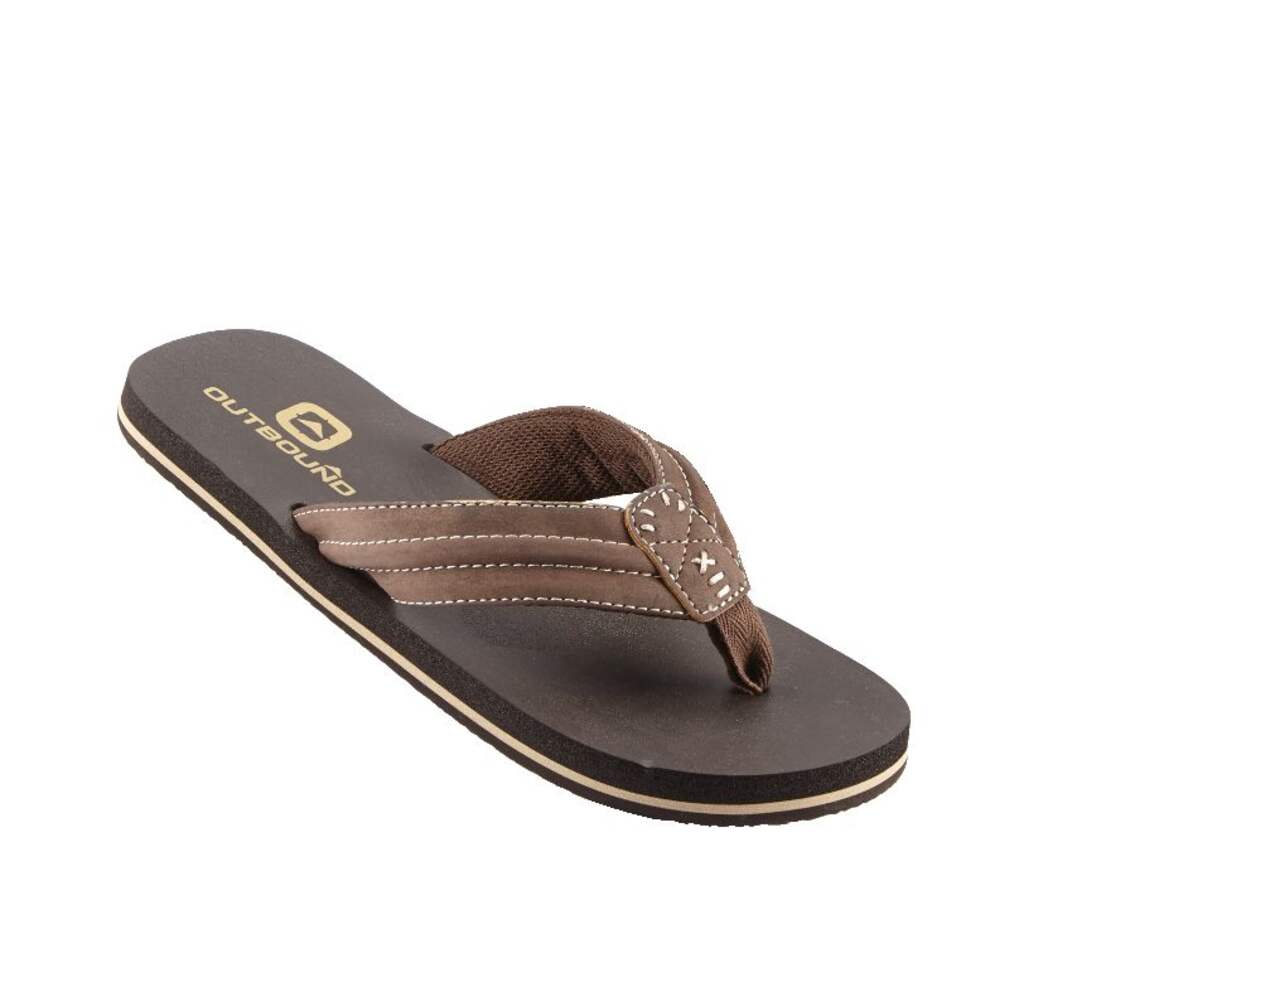 Outbound Men's Rogers Flip Flops/Sandals with Comfortable Footbed